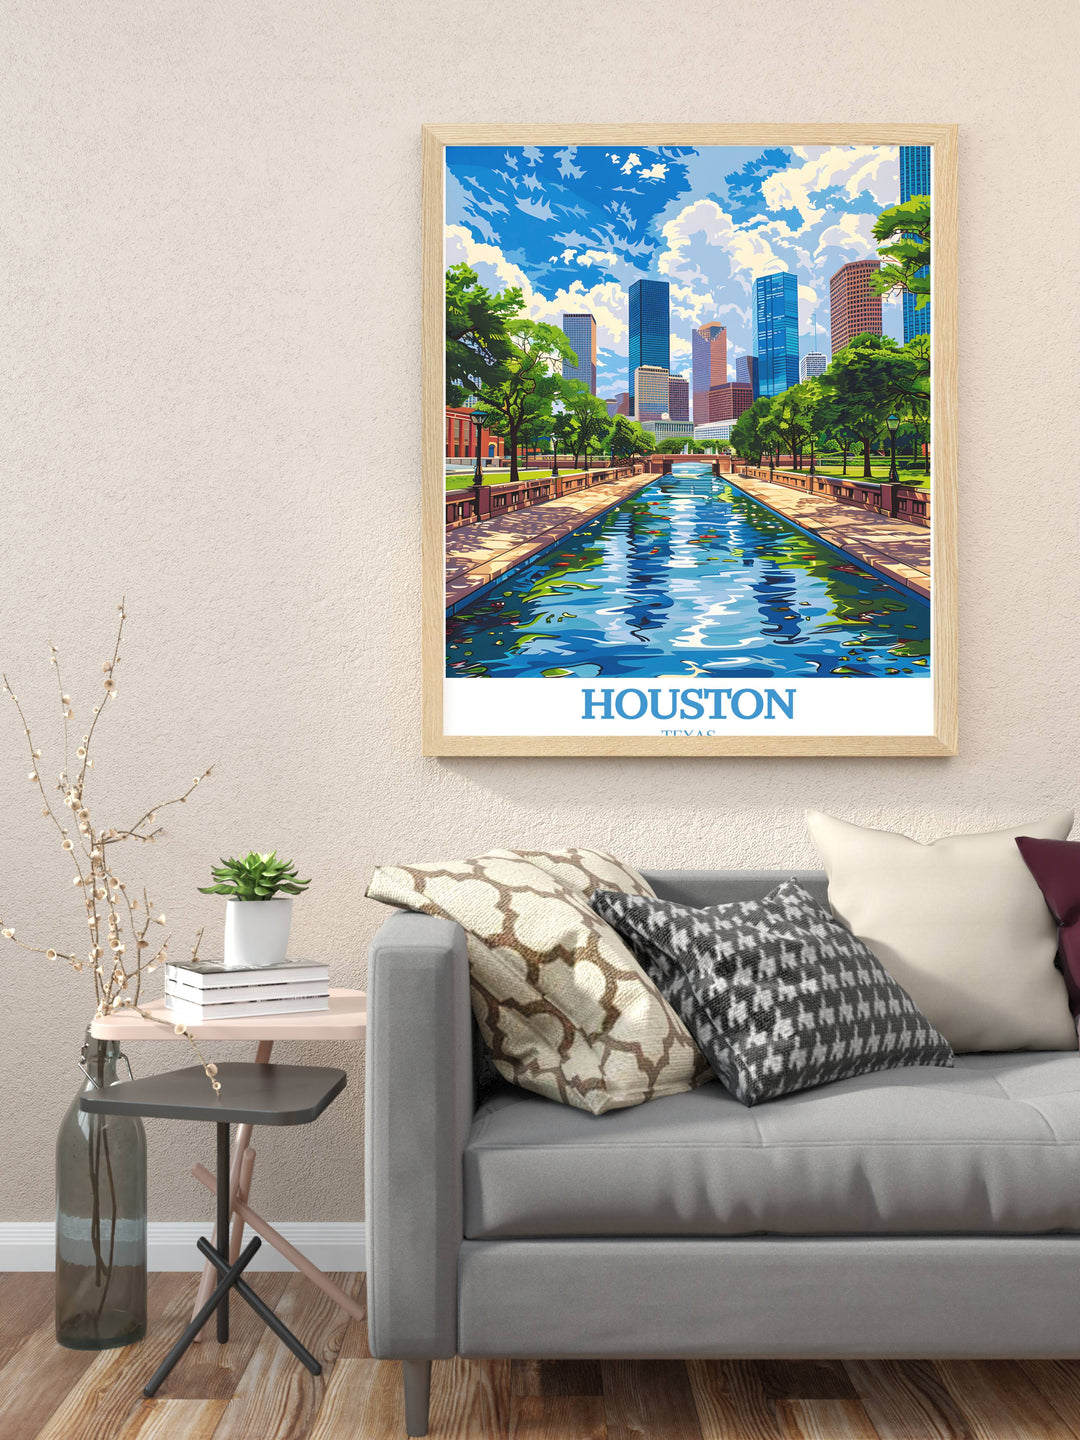 Houston travel poster featuring a panoramic view of the city from a high vantage point, great for inspiring wanderlust and city pride, and serving as a captivating wall centerpiece.